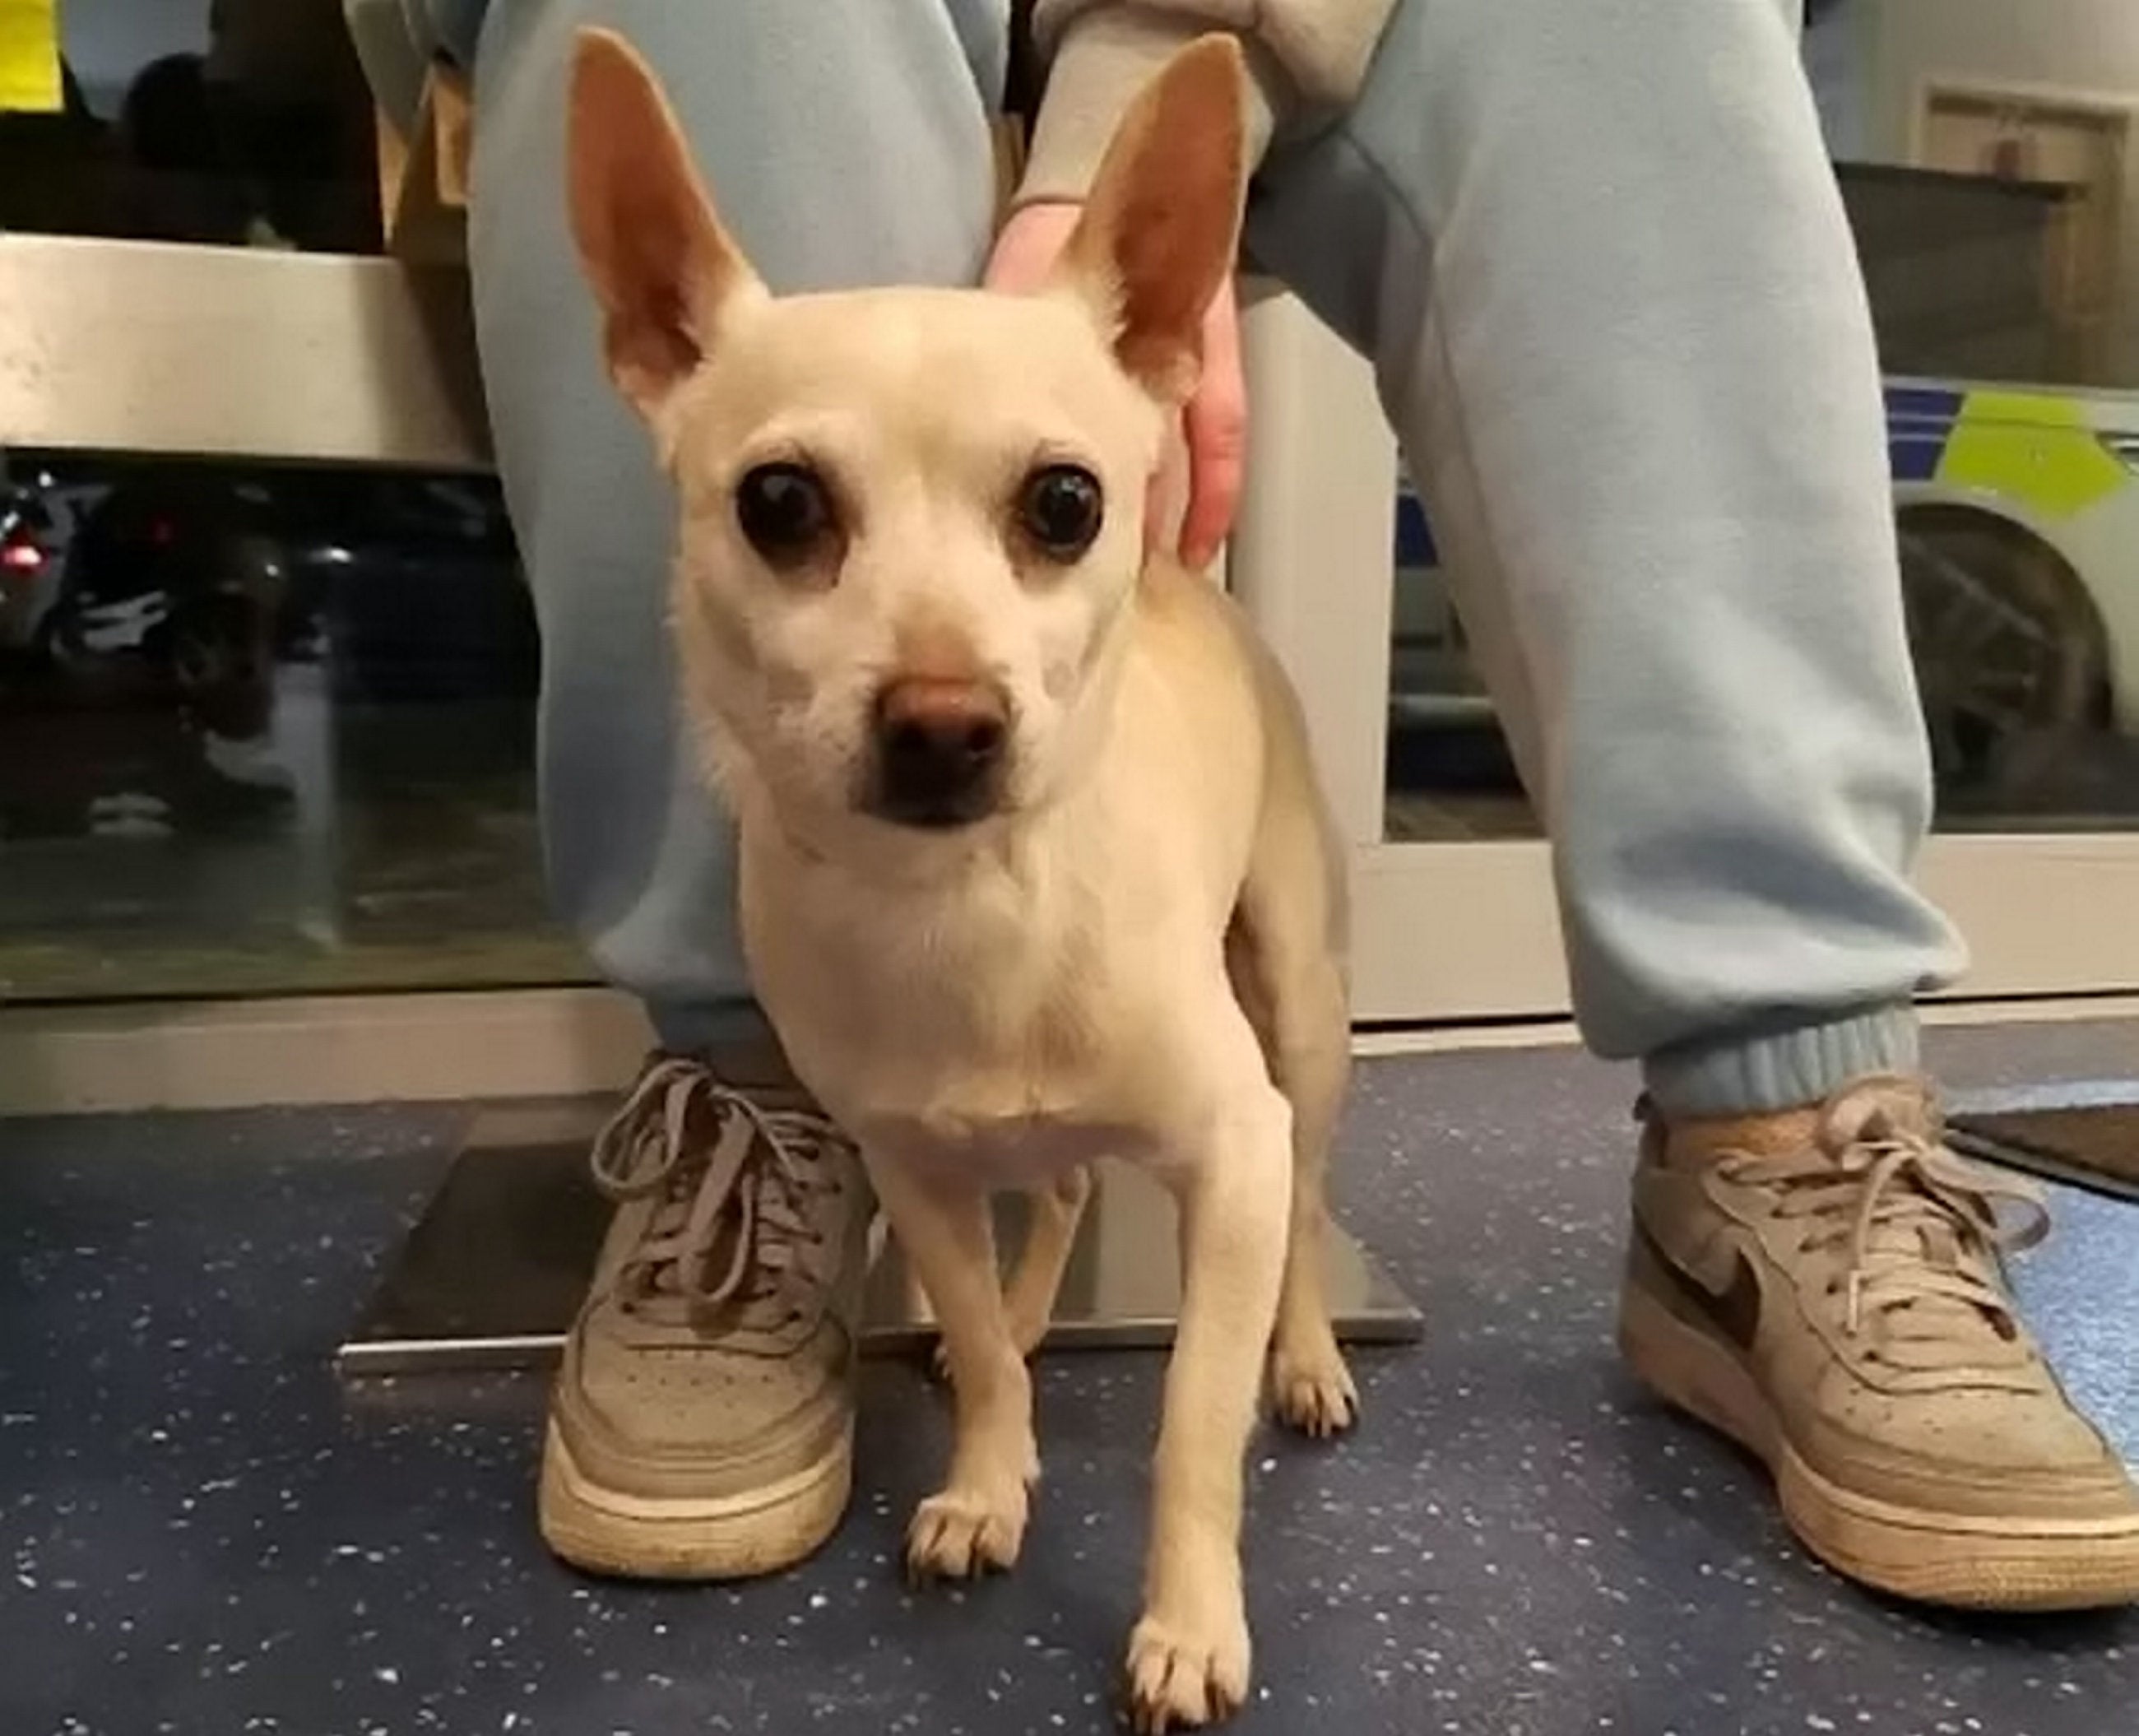 Chewy, the the chihuahua, was missing for seven years